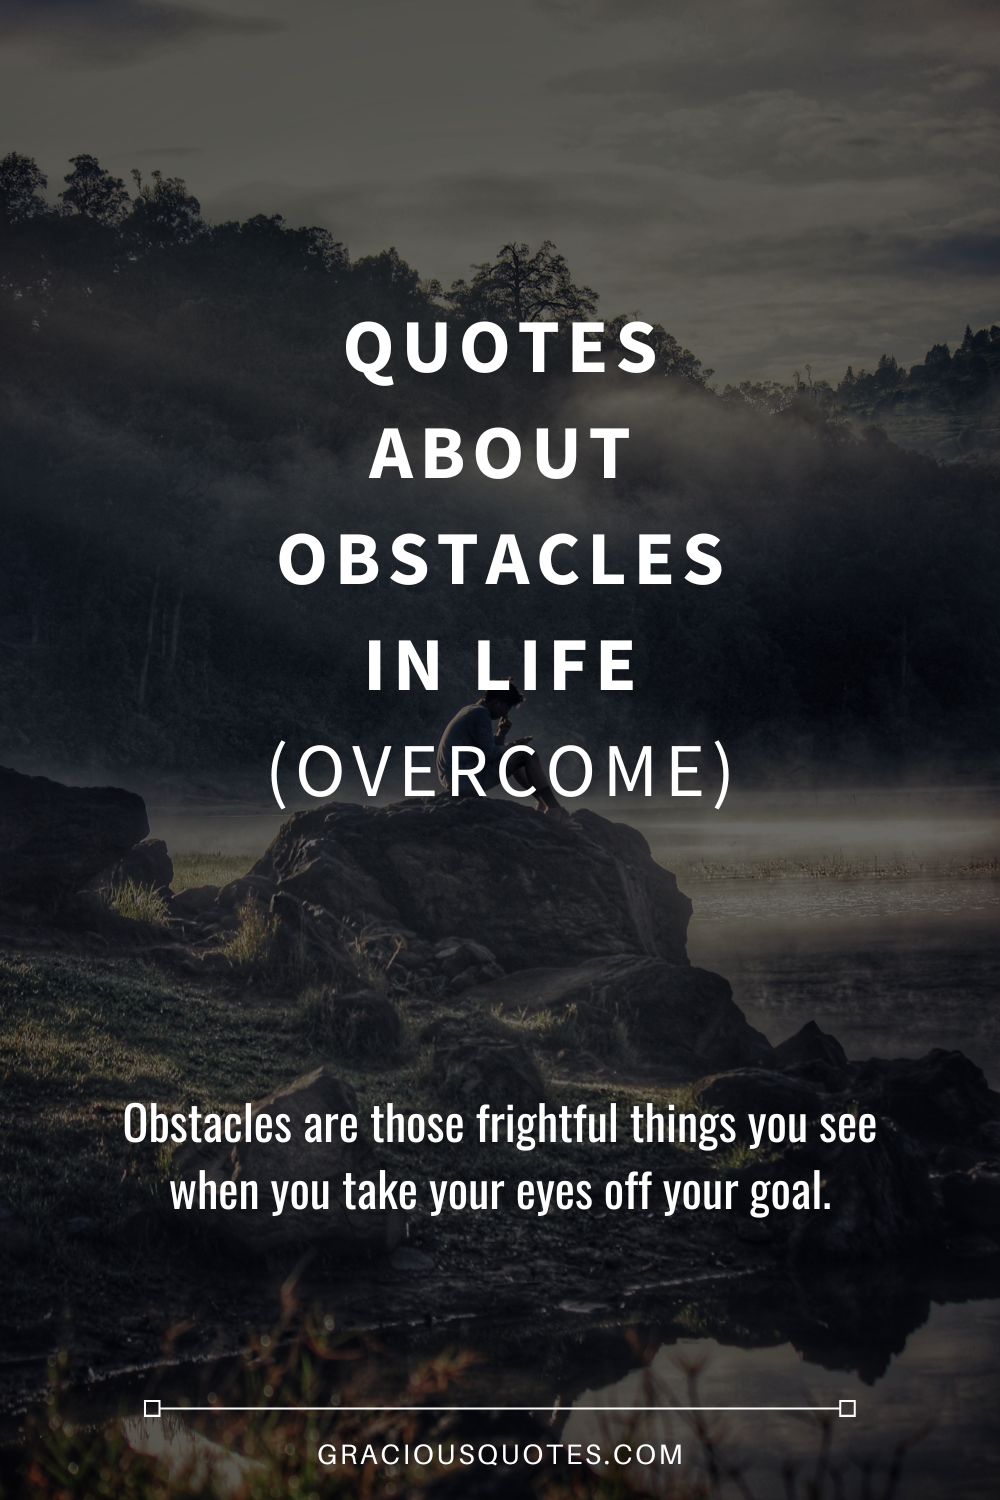 Quotes About Obstacles in Life (OVERCOME) - Gracious Quotes